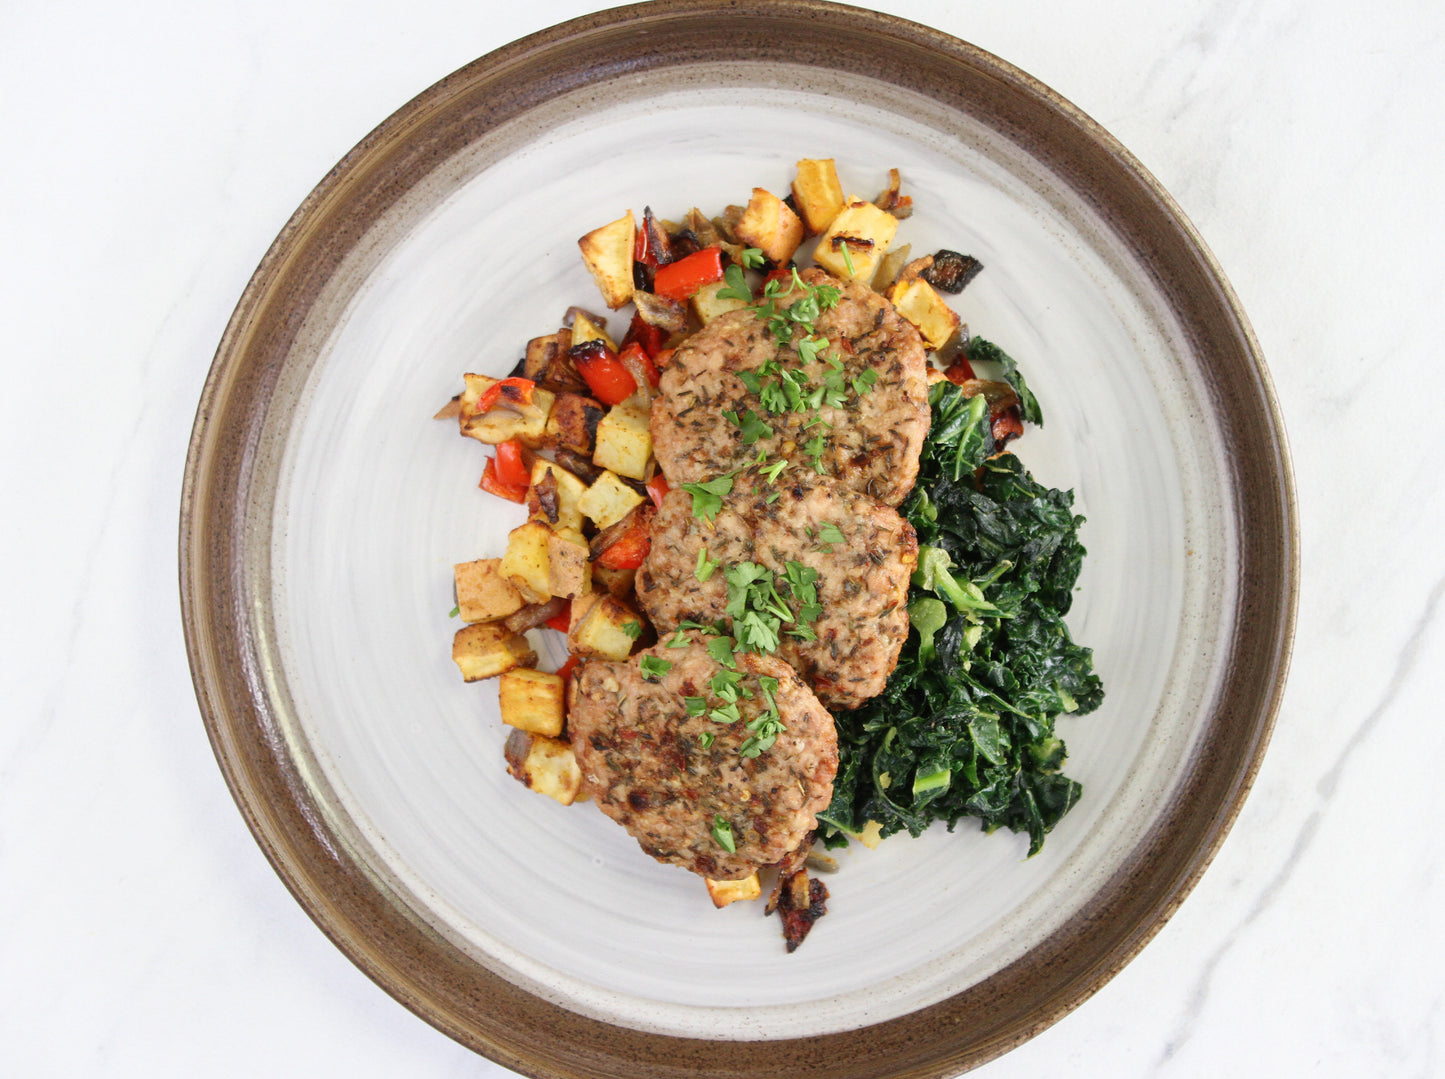 Jerked Chicken Sausage with Sweet Potato Hash and Kale